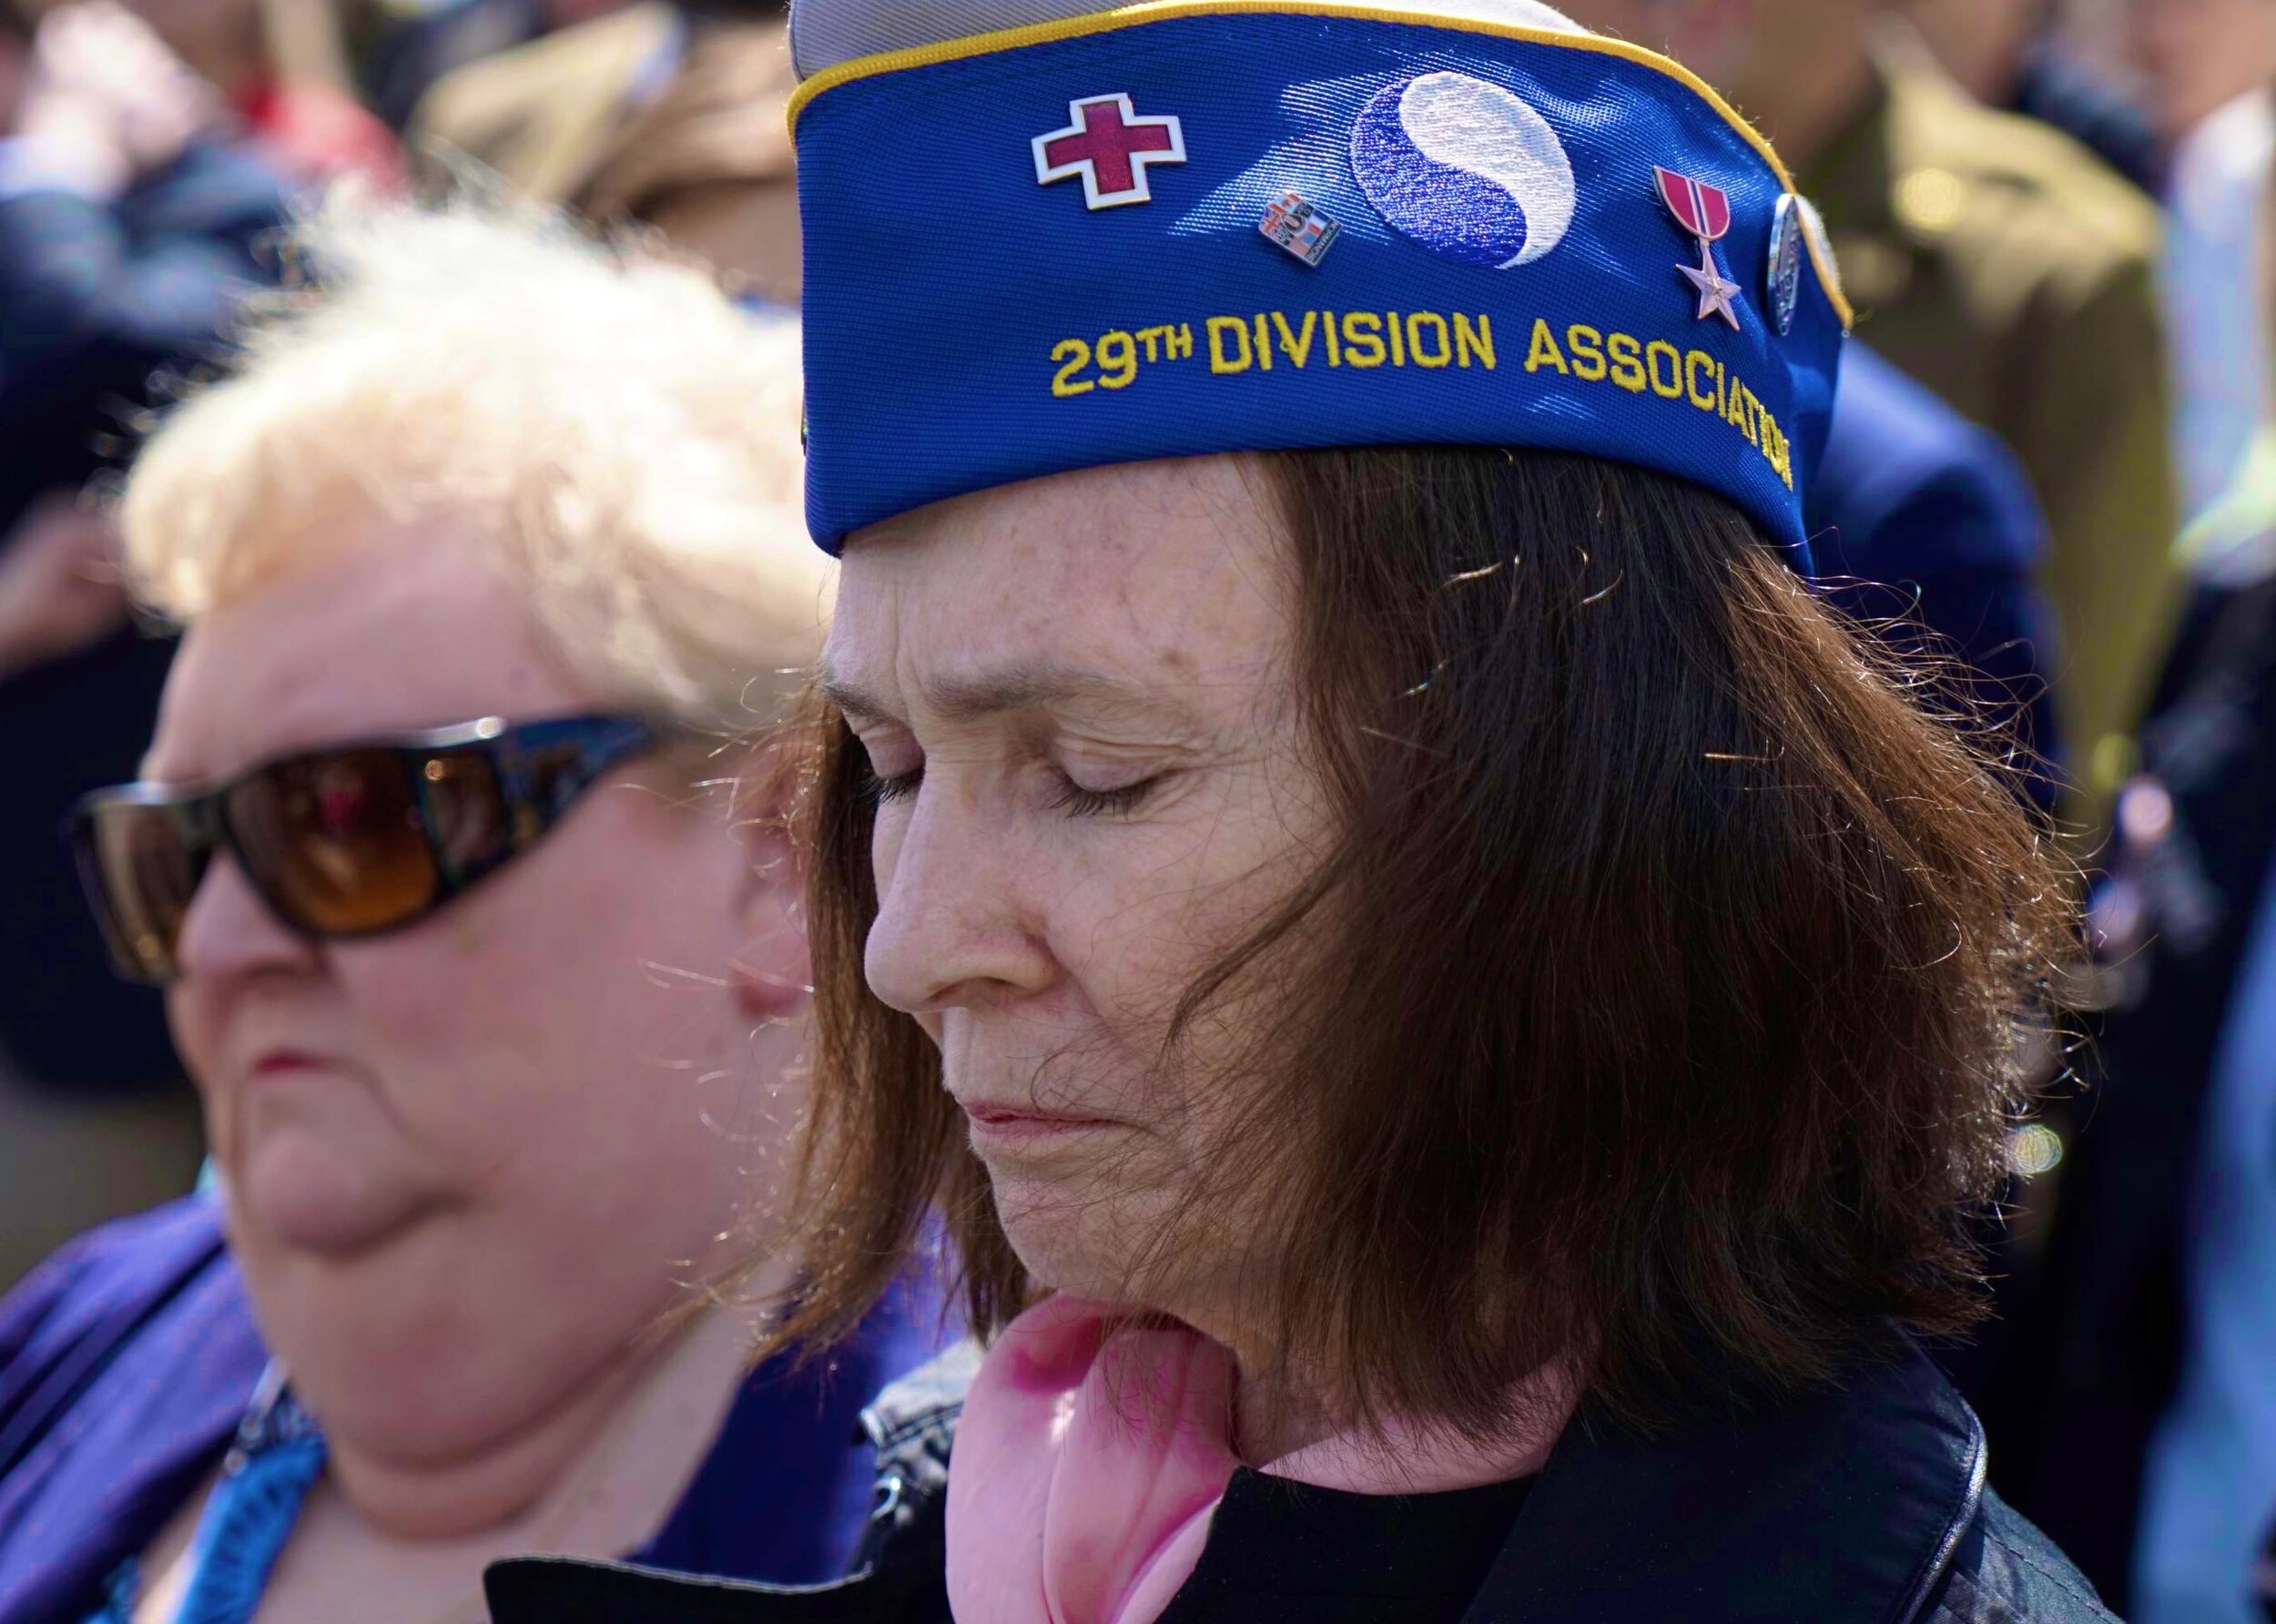  Jody Sherr Dulude, daughter of D-Day veteran Melvin Sherr. Since their father’s death, Jody and her sister Fran have been heavily involved in the 29th Division Veterans’ Association.  